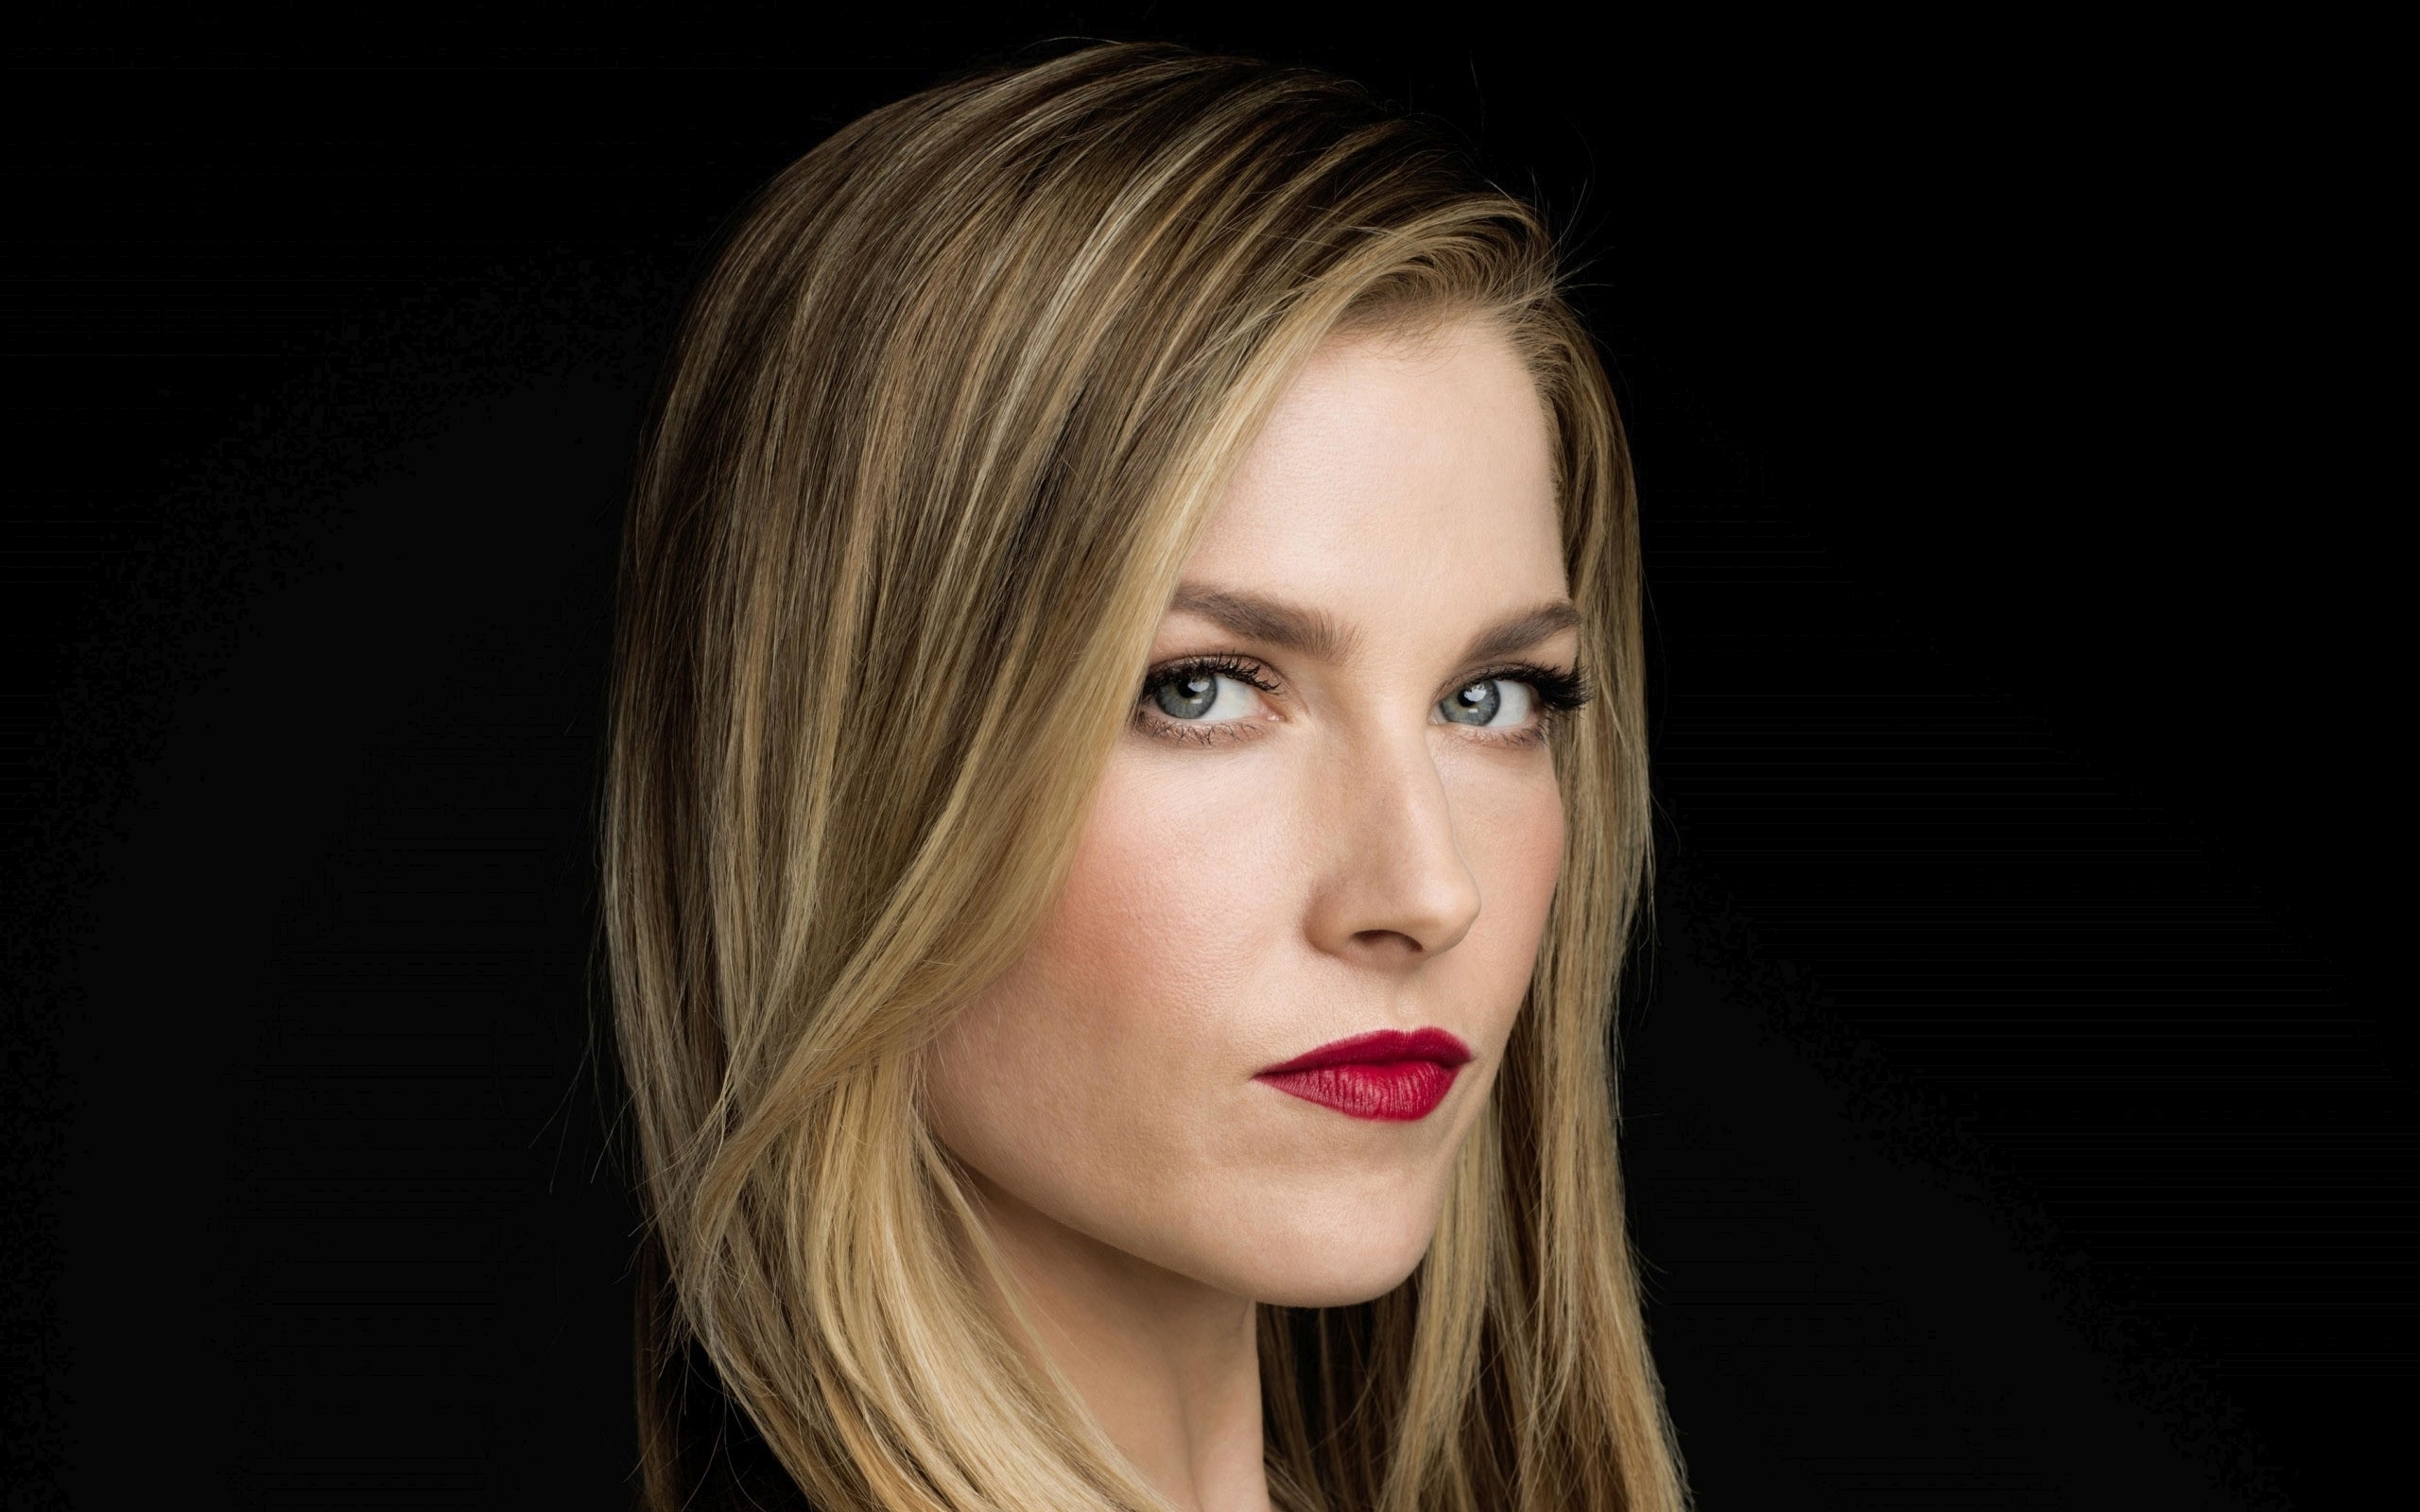 Ali Larter with red lipstick on her lips.